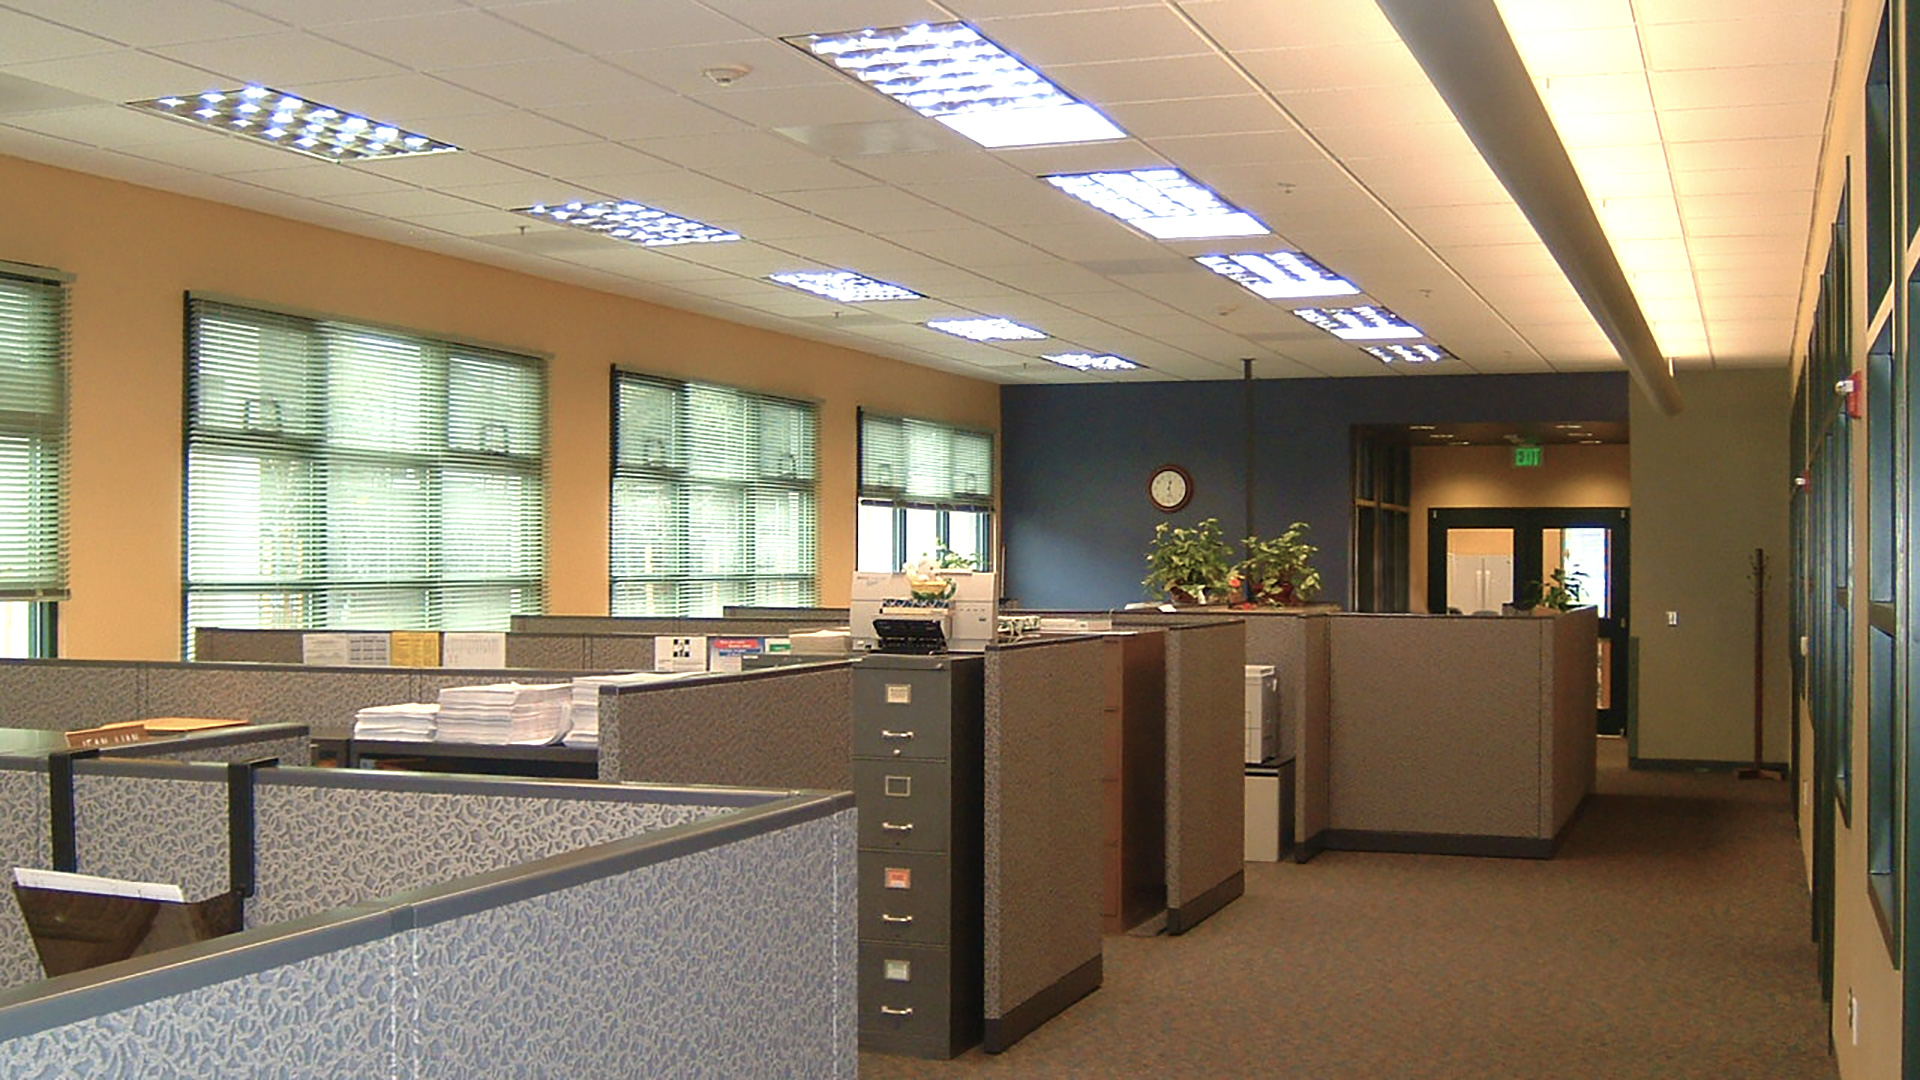 Interior of district office, with blue accent wall, windows, and cubicals.